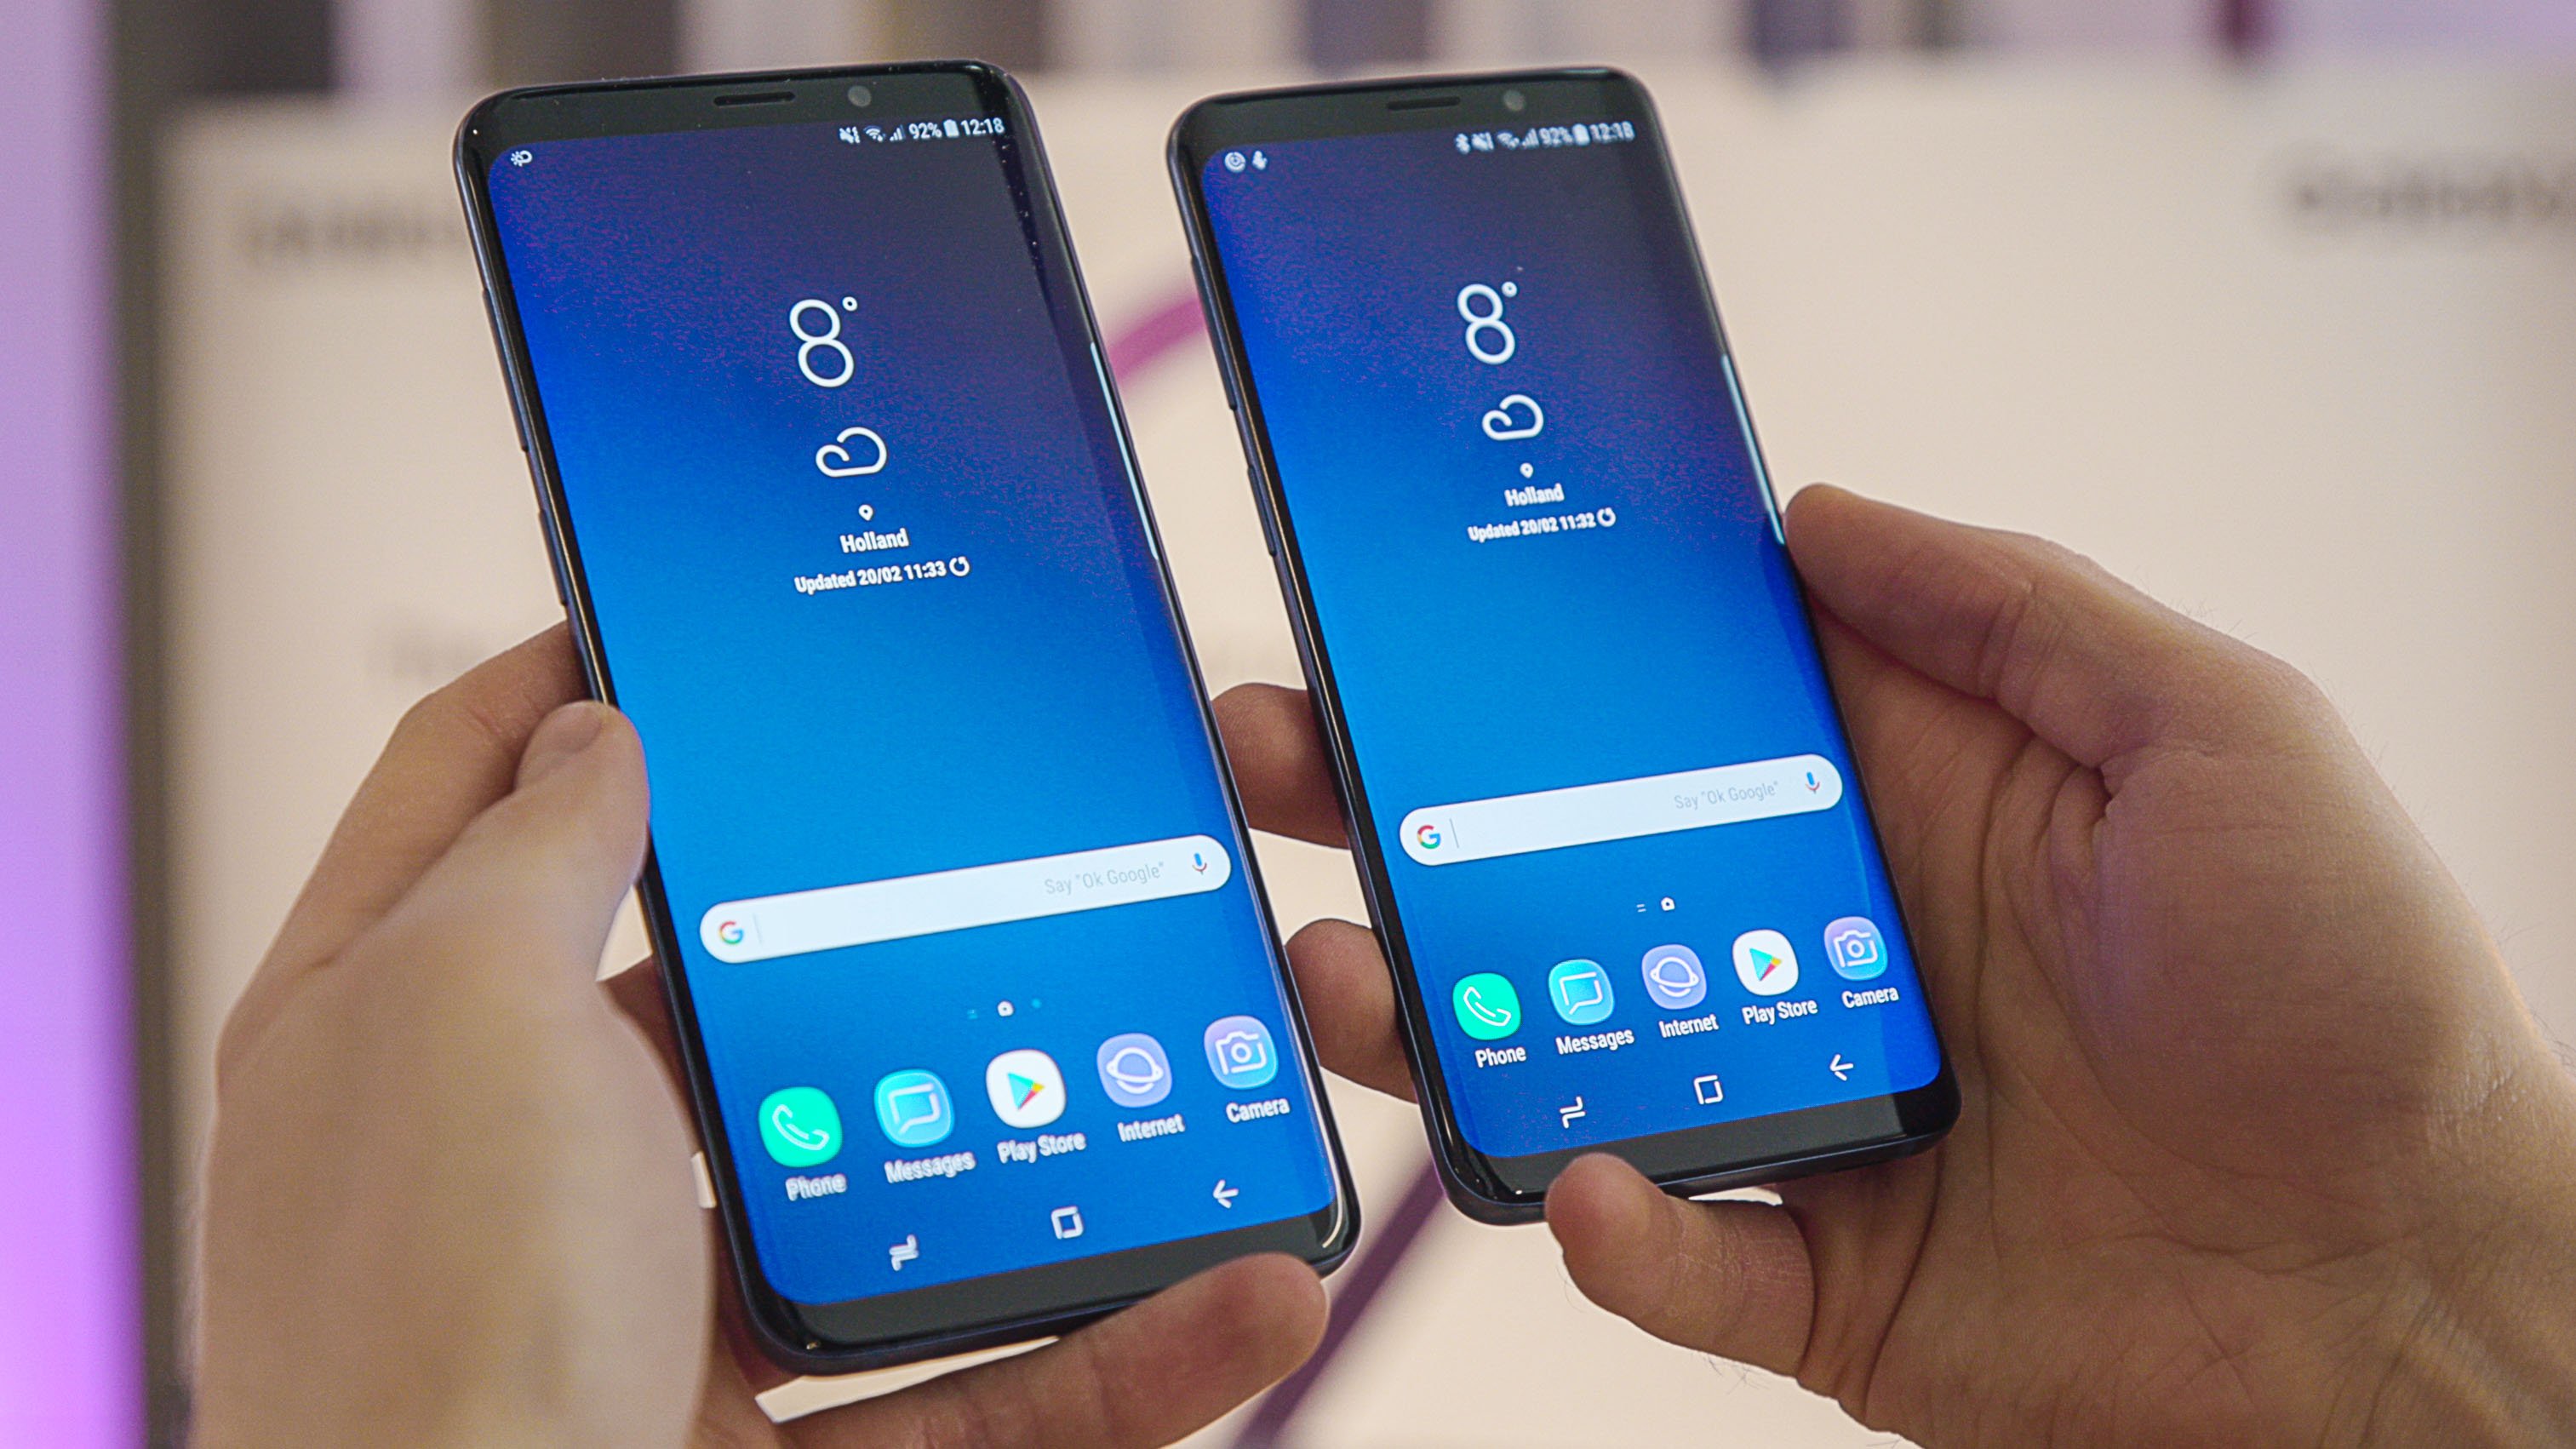 Samsung Galaxy S9 and Galaxy S9 Plus units are getting second One UI 2.0 beta versions